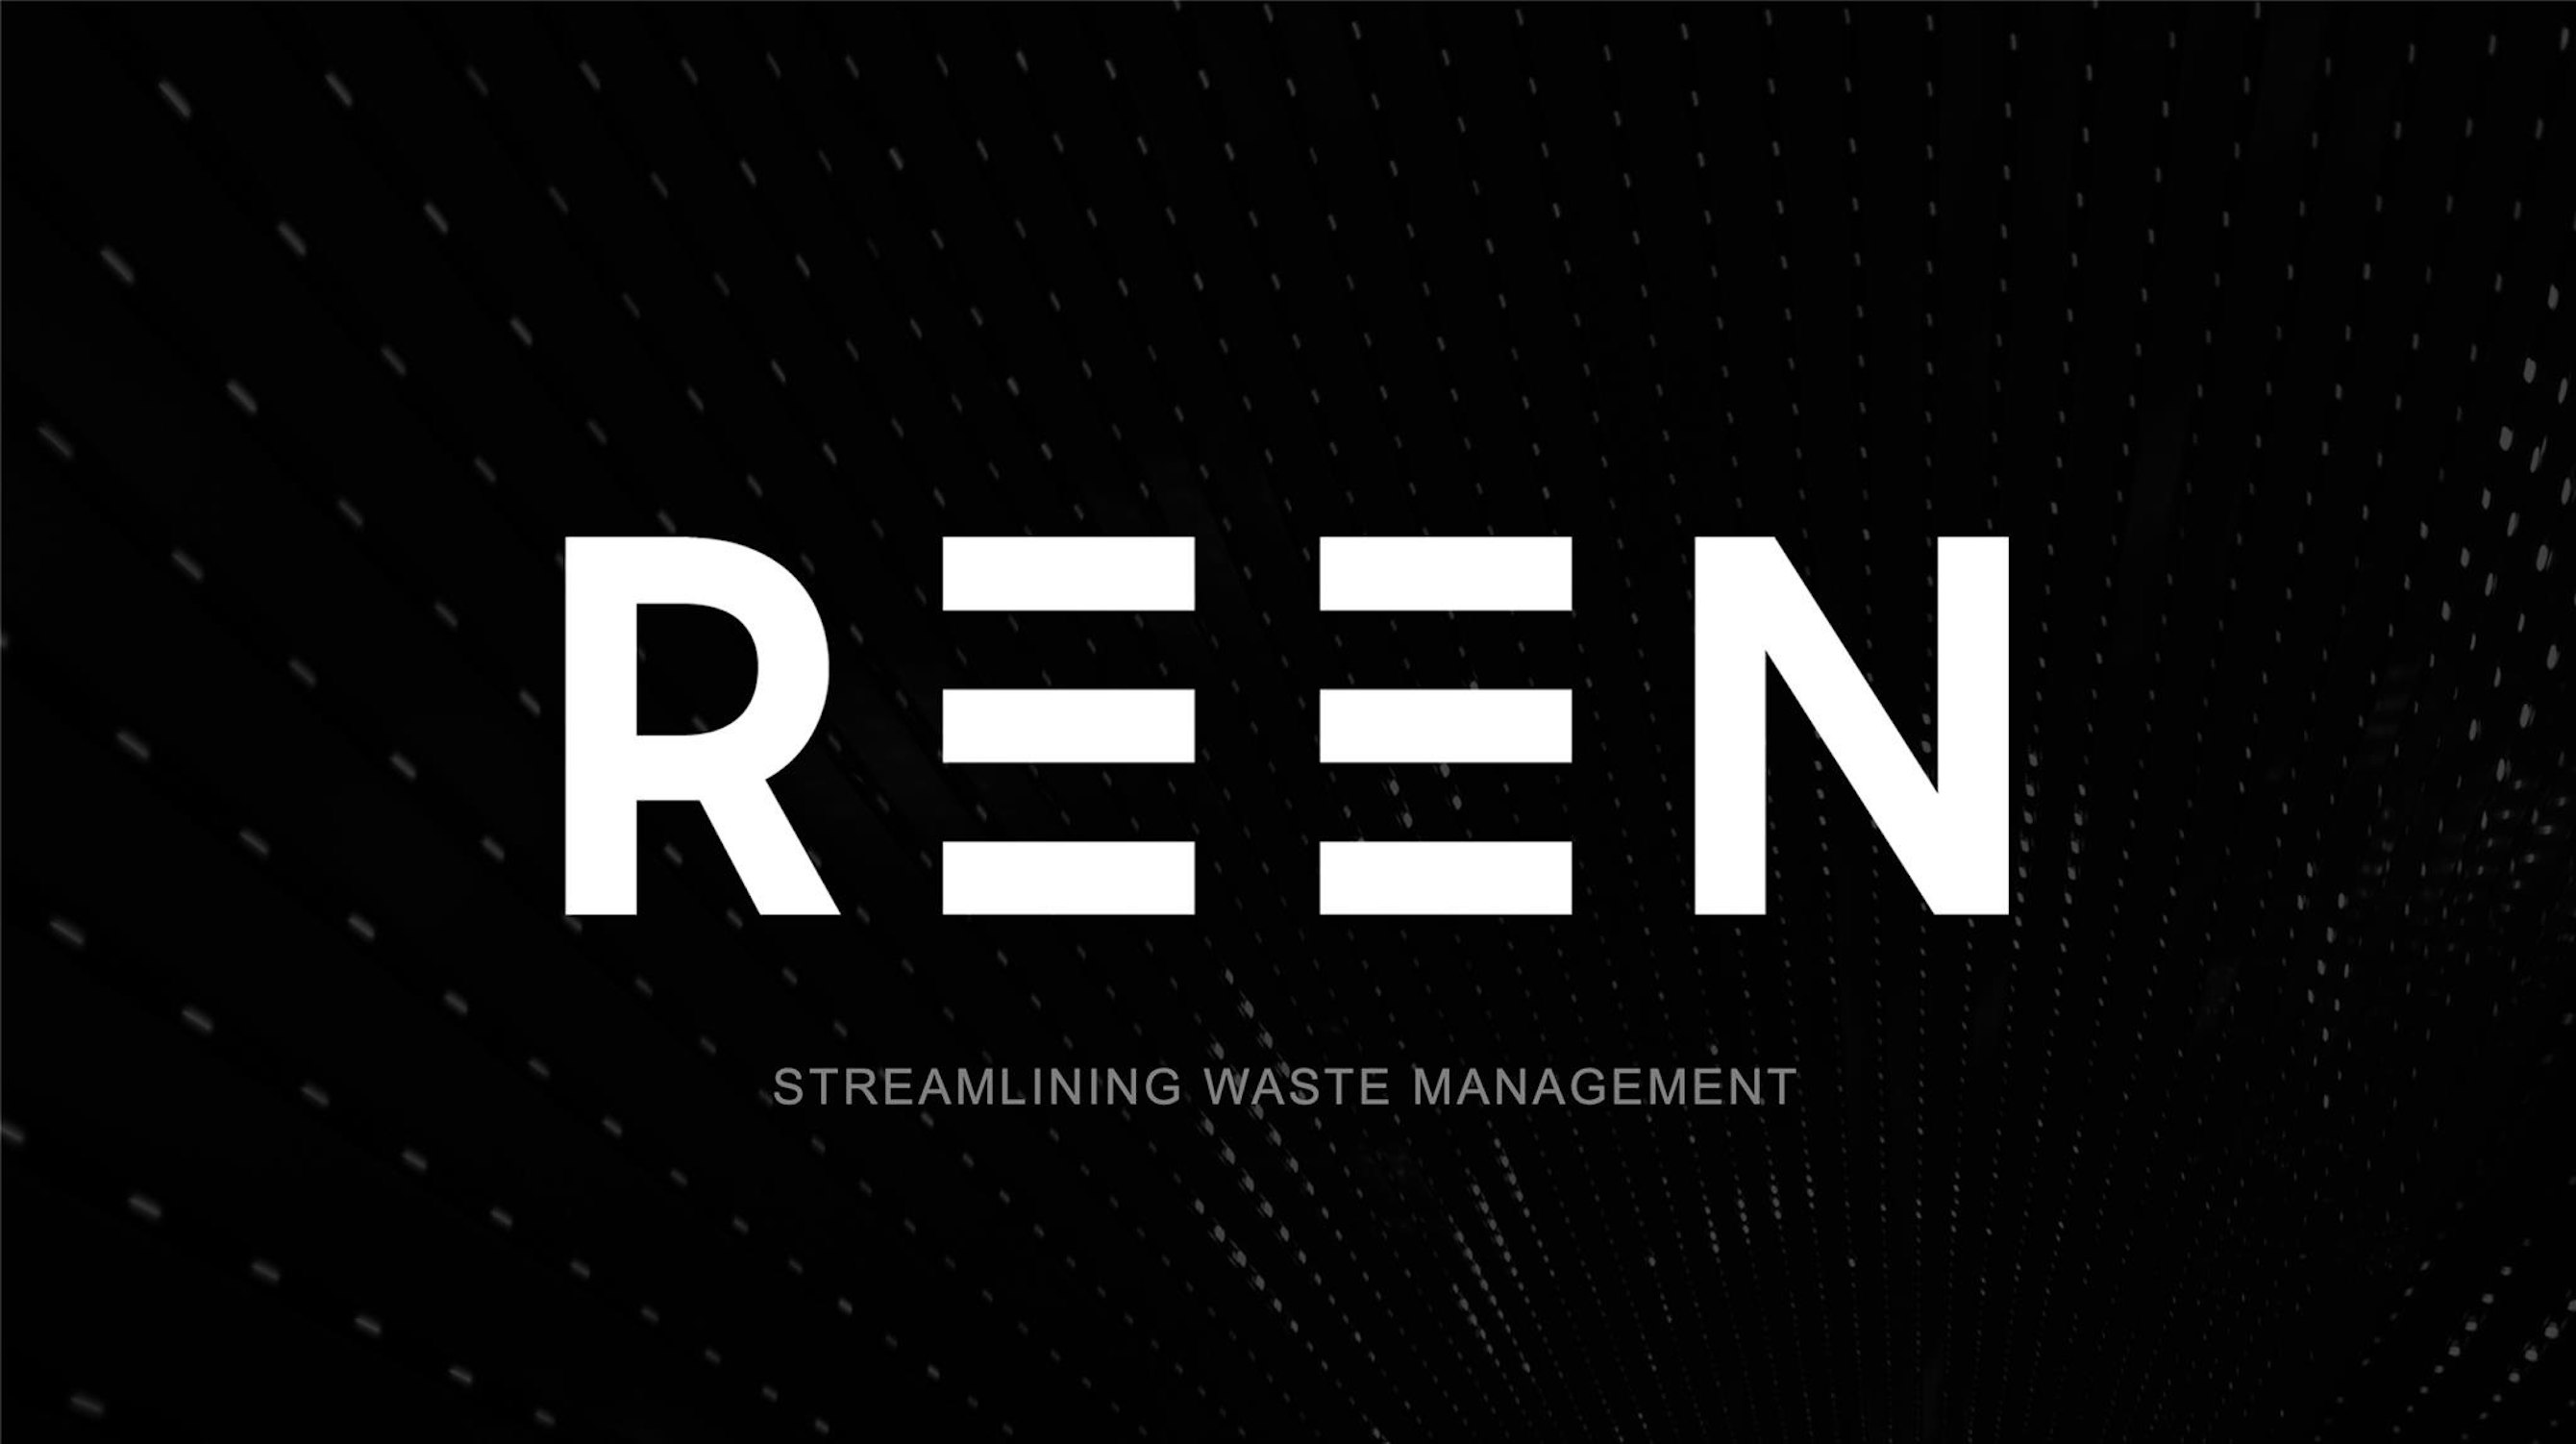 The ABAX Venture Company REEN acquires Enevo Group